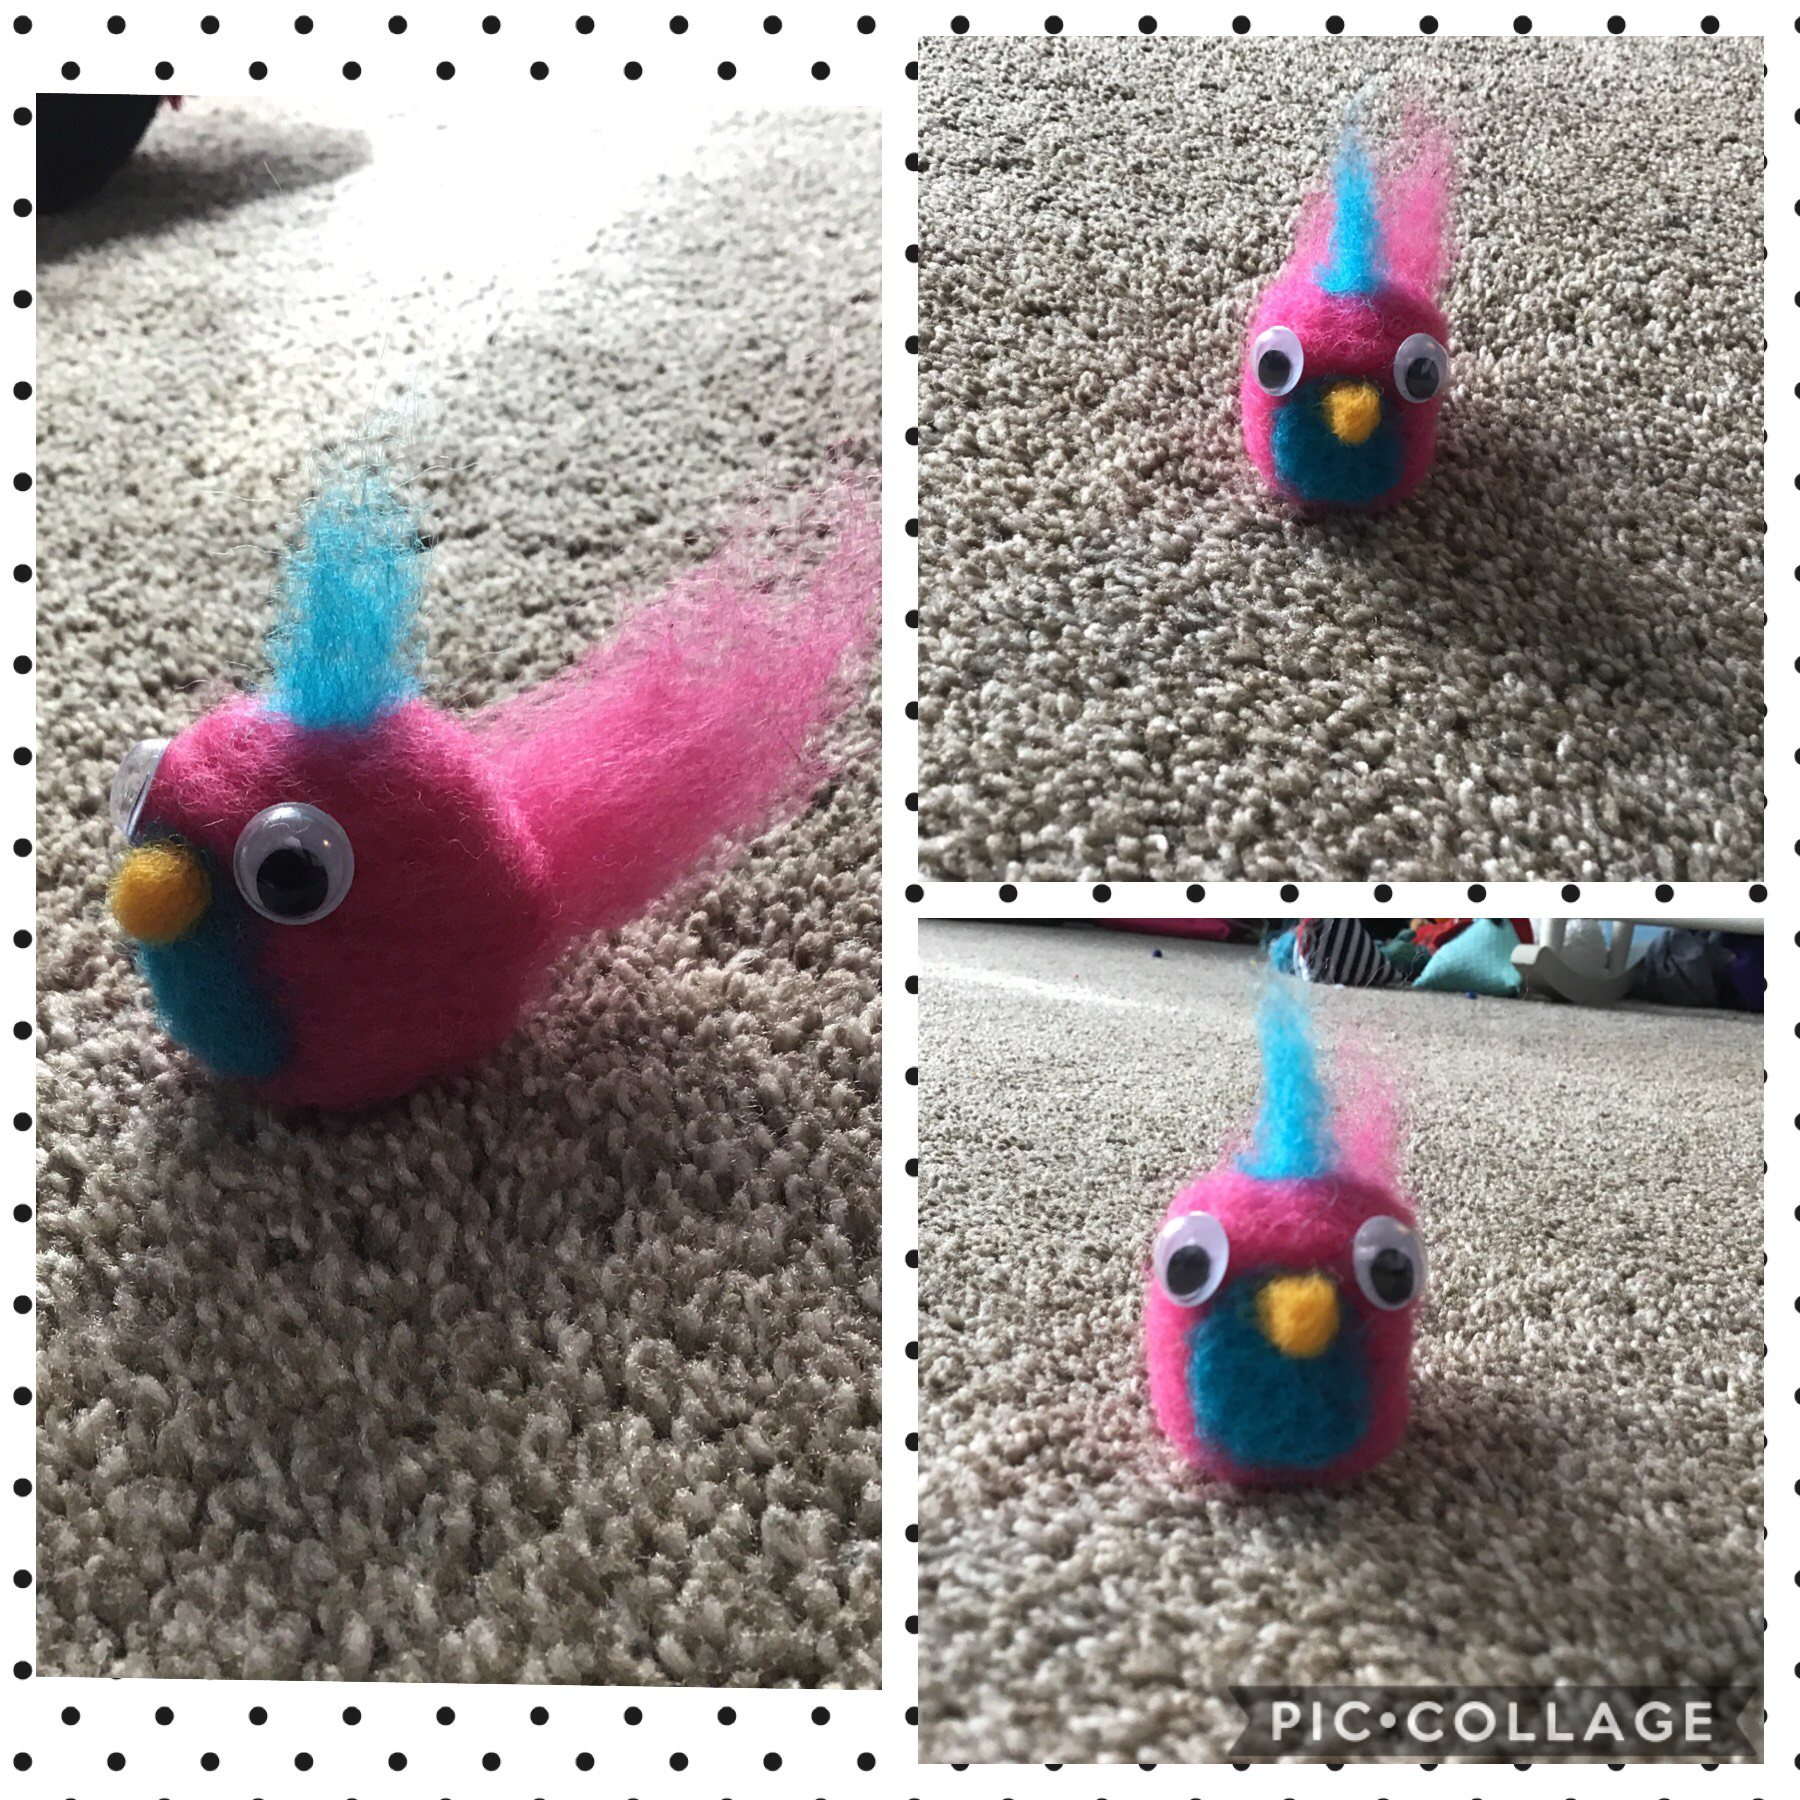 So I made this, it’s a felted bird, and it looks like a character off Trolls movie 😜